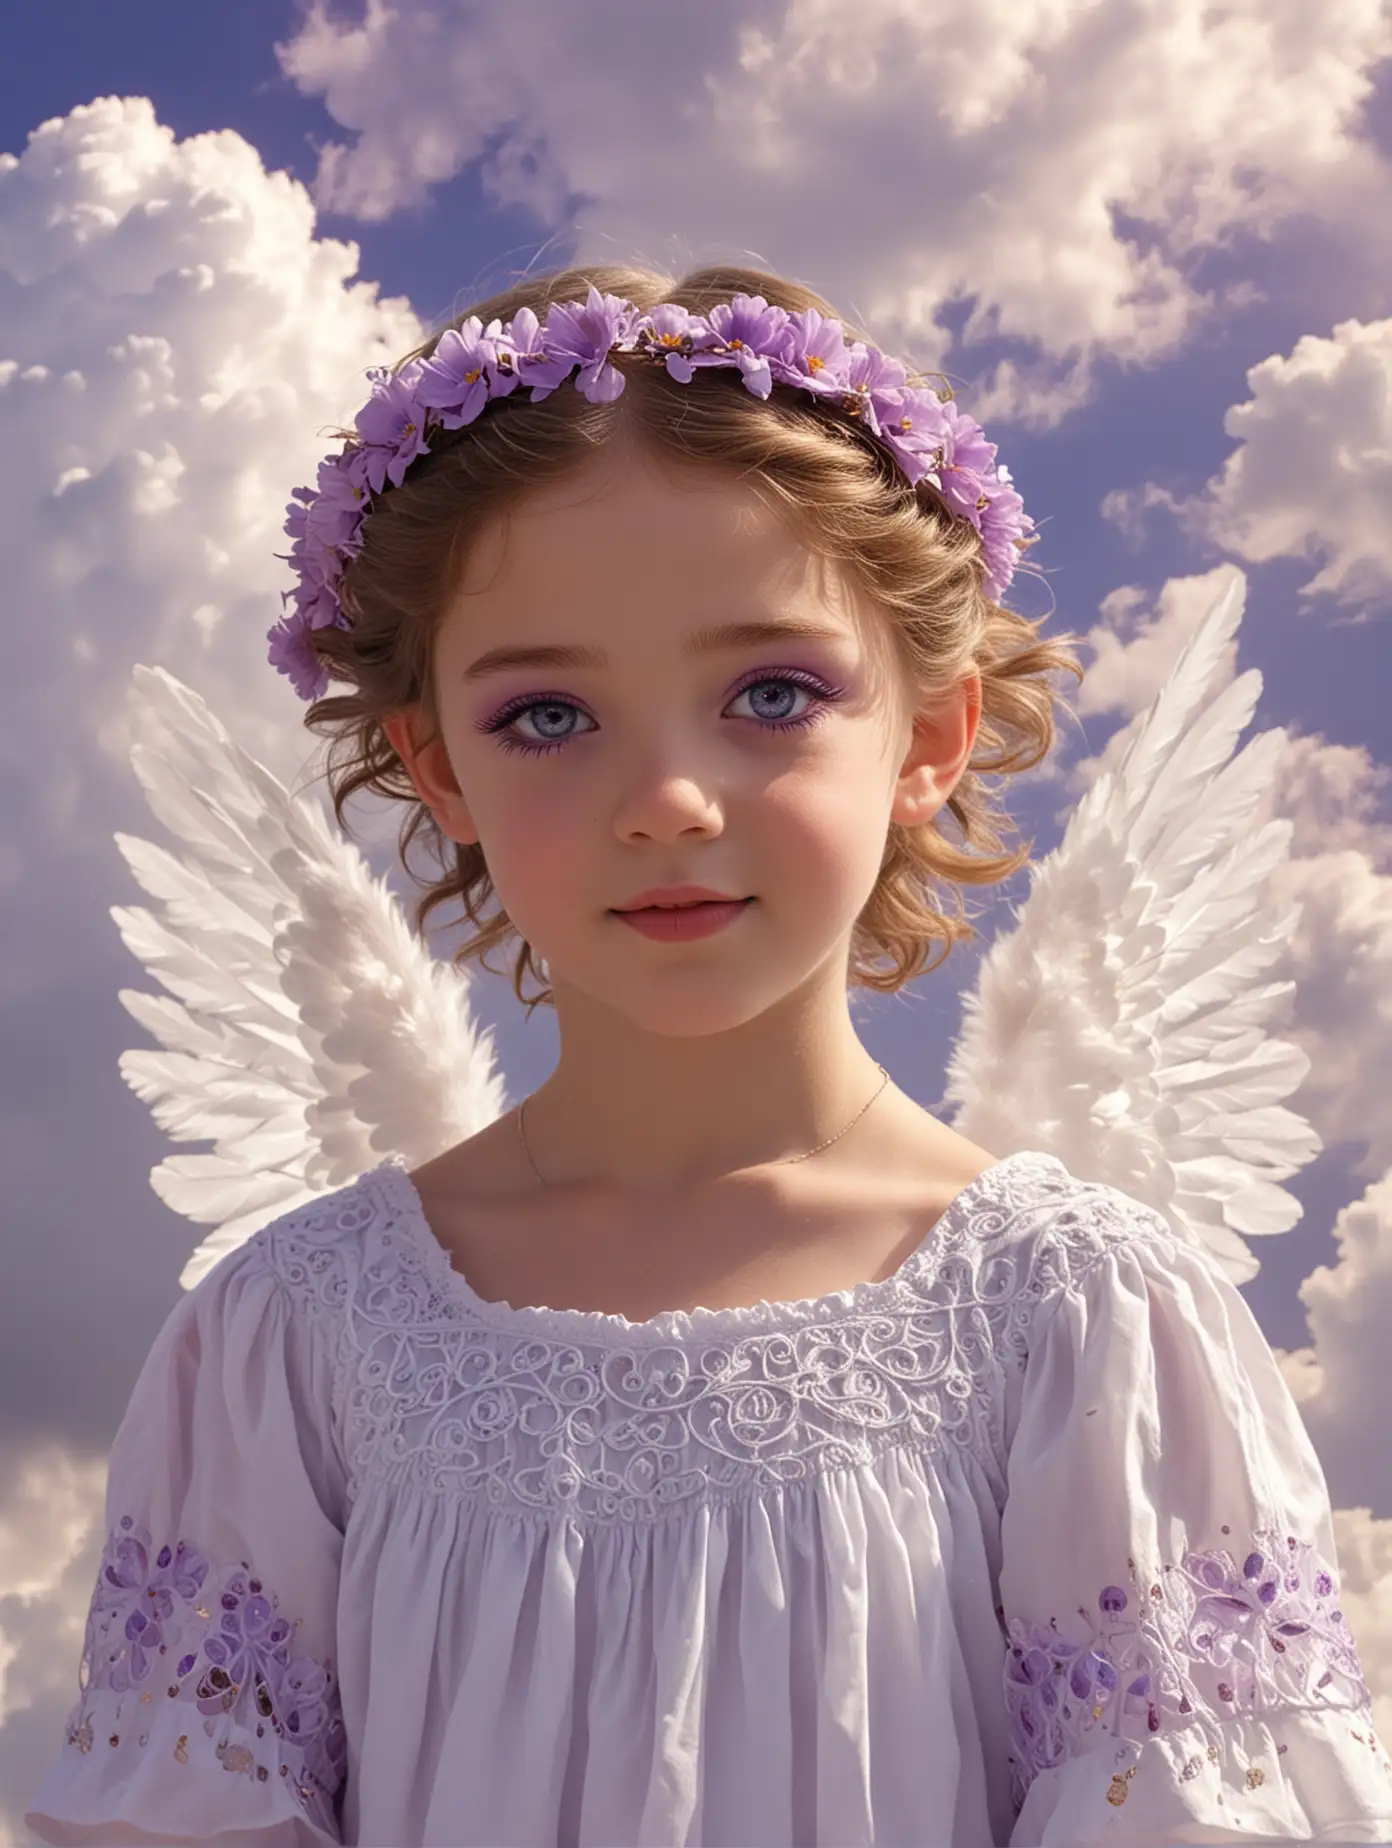 preteen angelic cupid girl with very bright purple eyes. wearing a very short white muumuu dress. located in the clouds